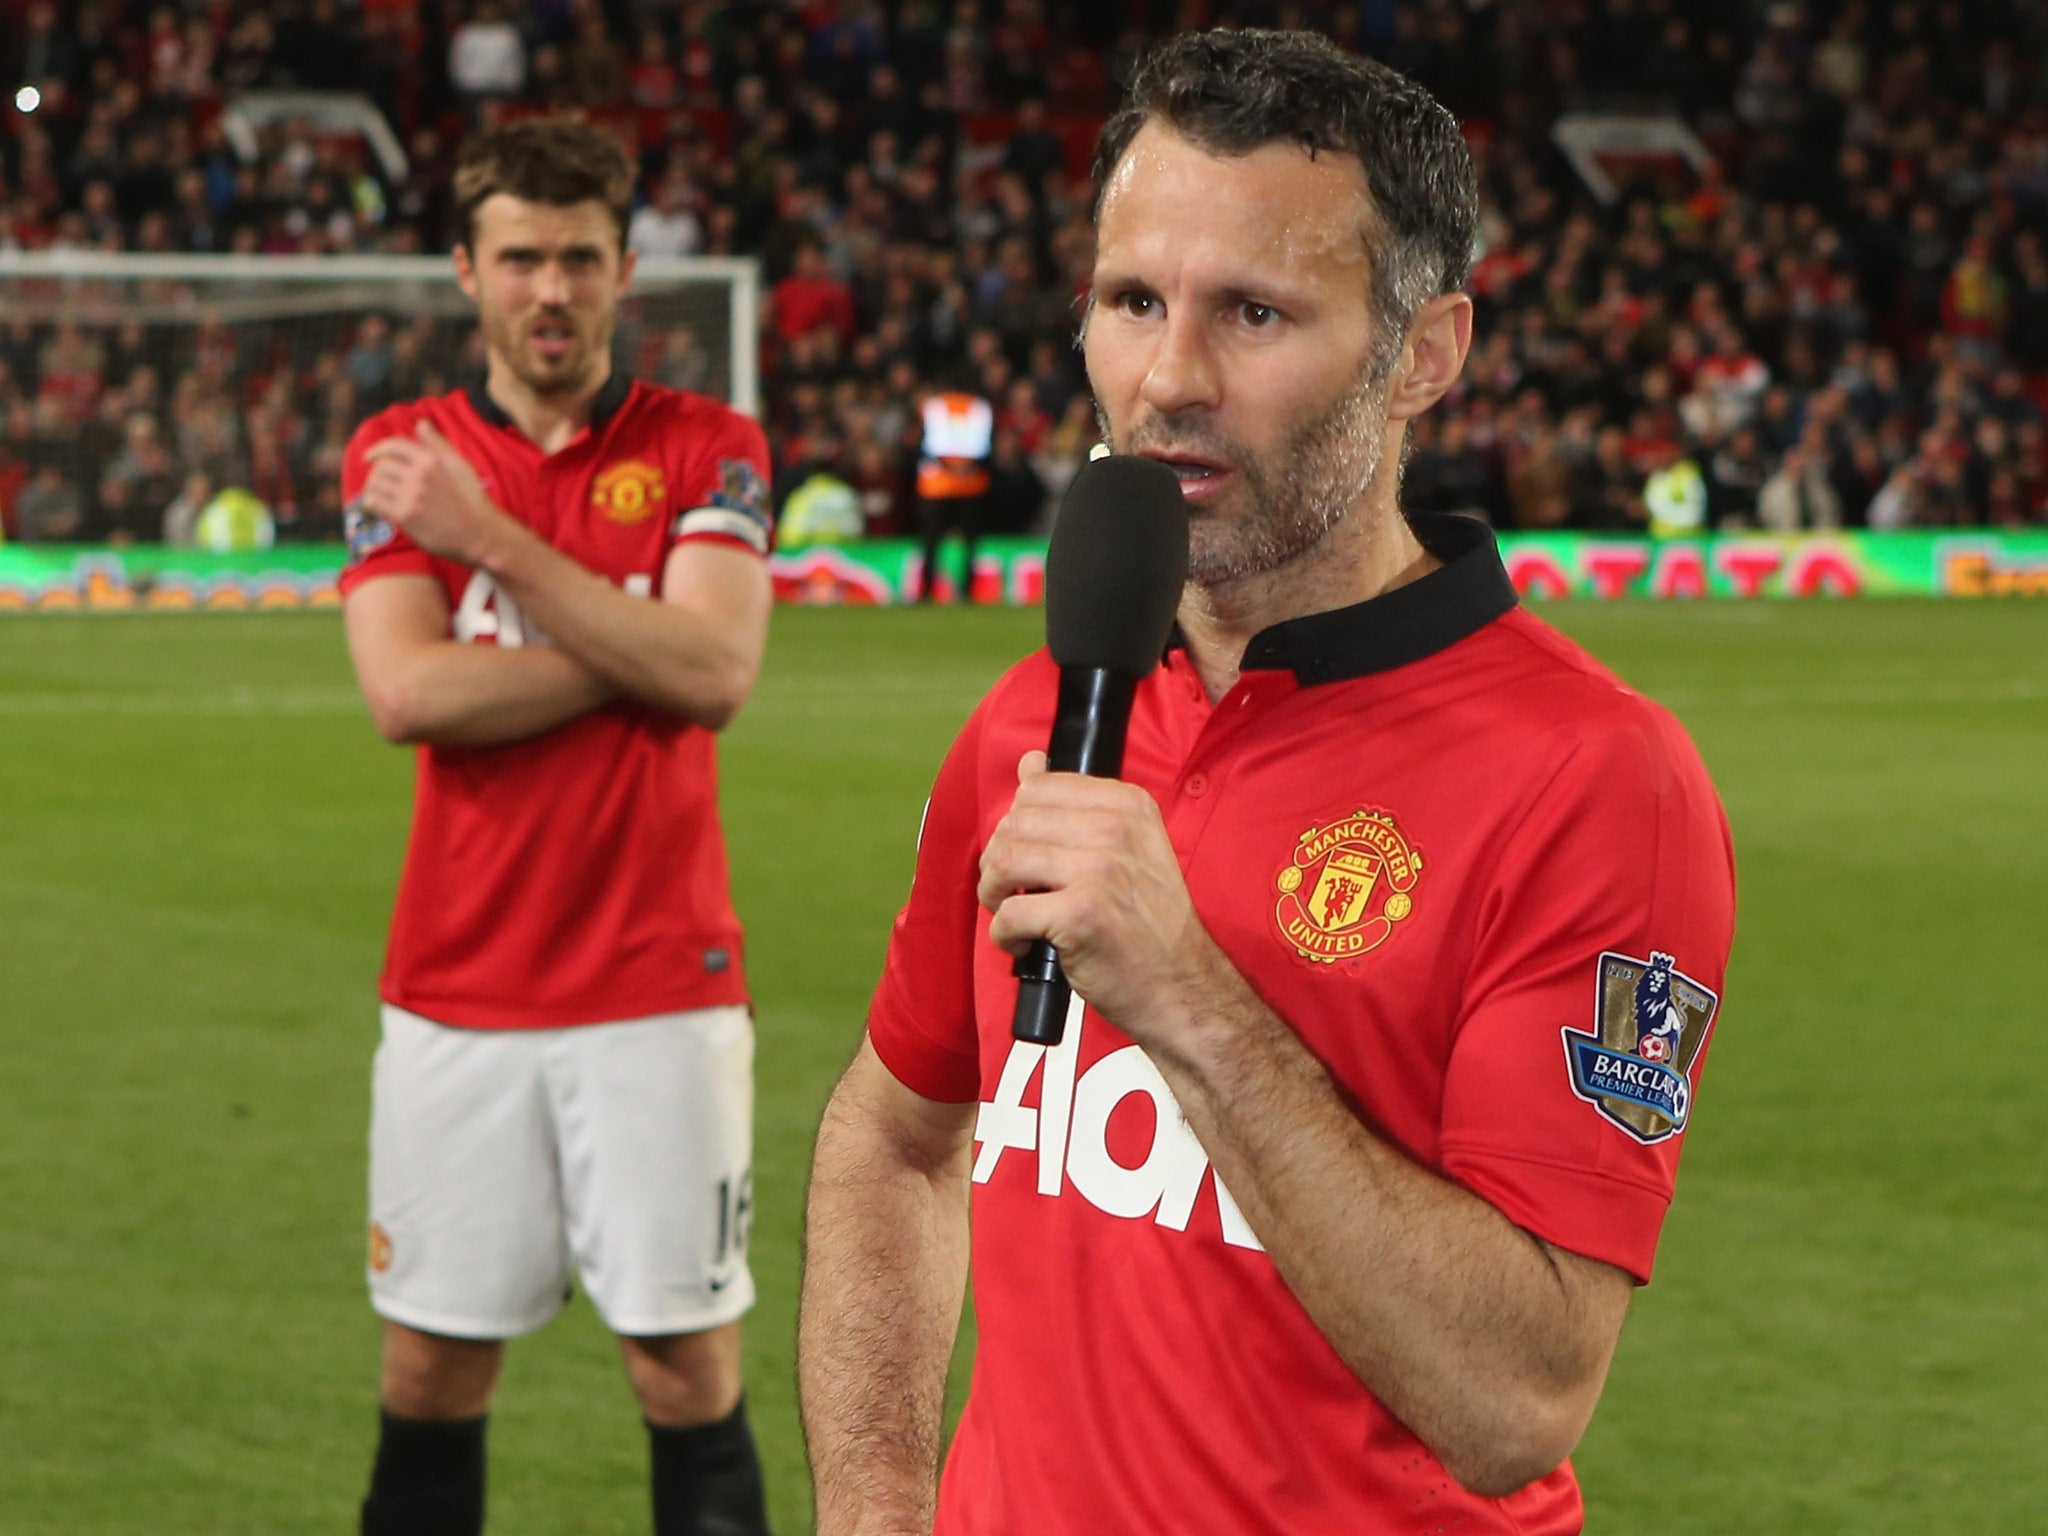 Ryan Giggs addresses the Old Trafford crowd after their final home game of the season, promising the good times will return